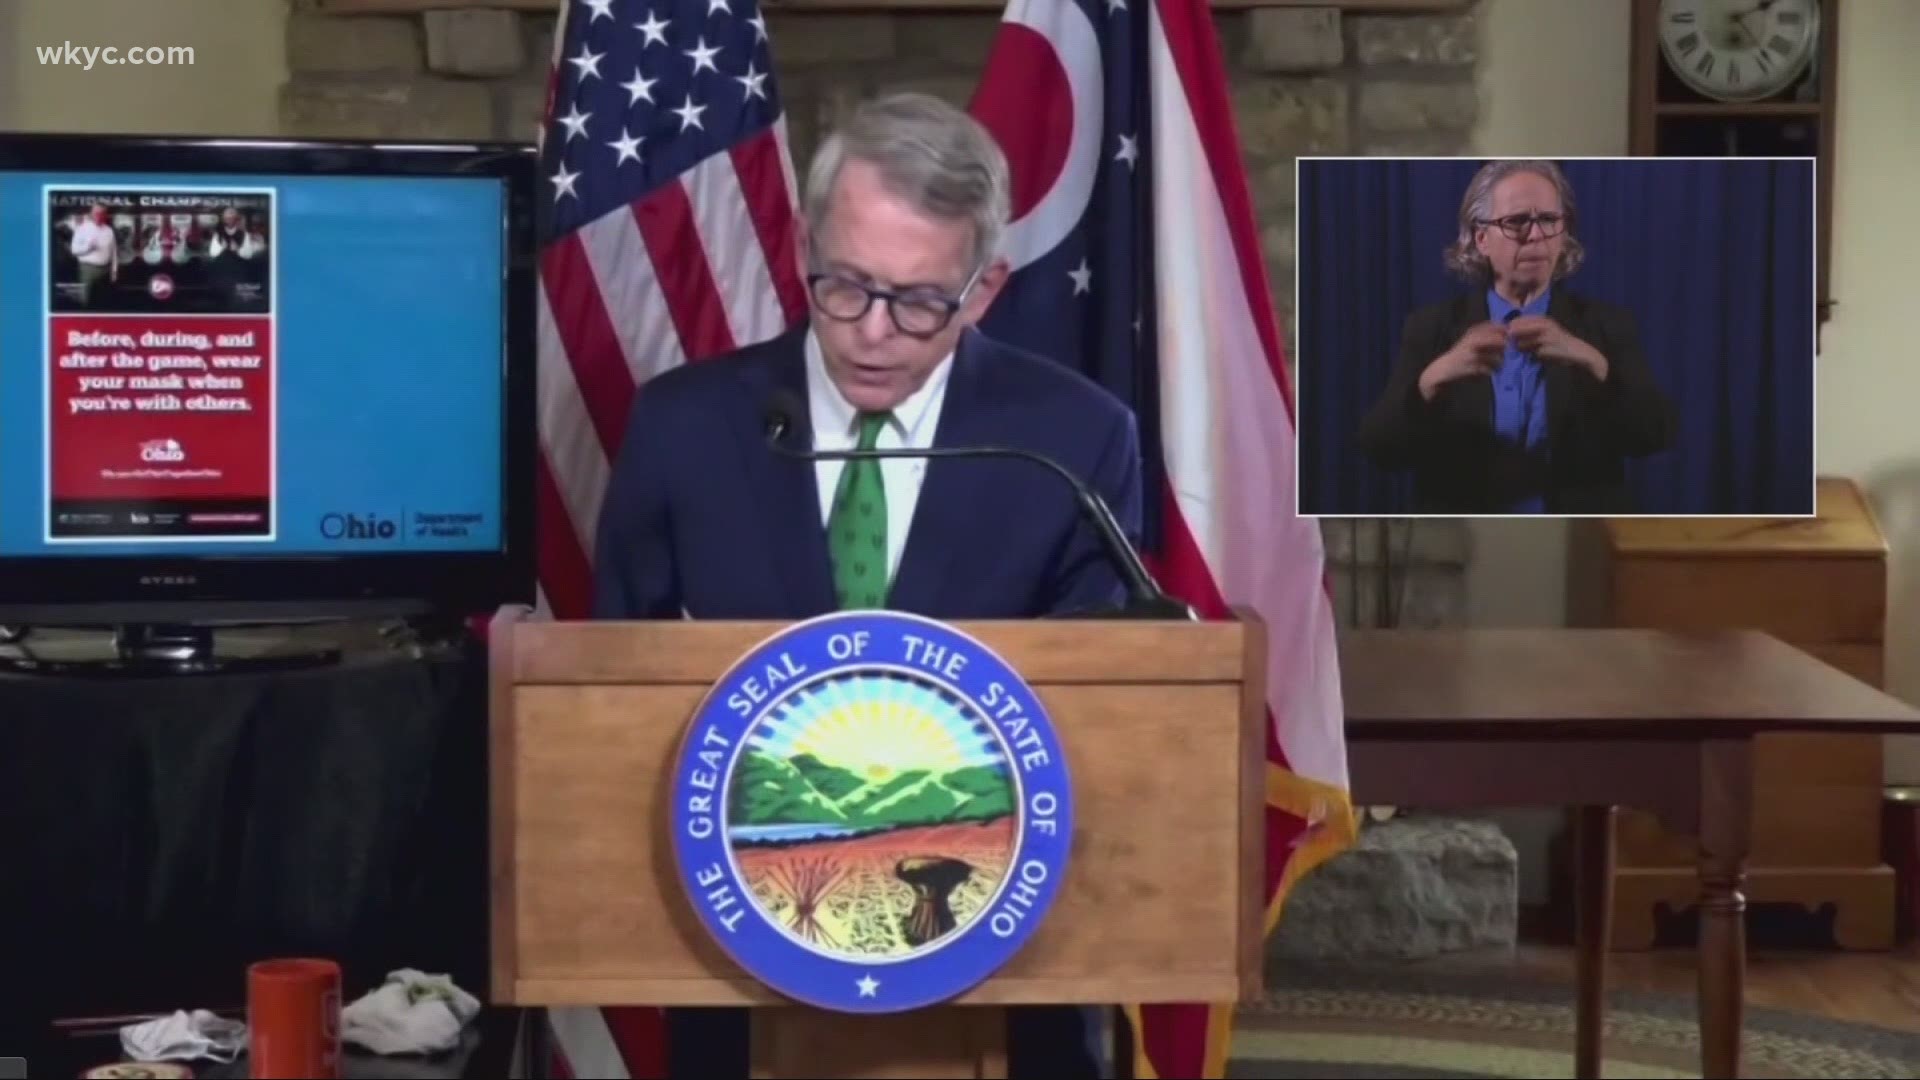 As Ohio continues to see a spike in coronavirus cases, Governor Mike DeWine is urging the state's citizens to reconsider their behavior. Laura Caso reports.